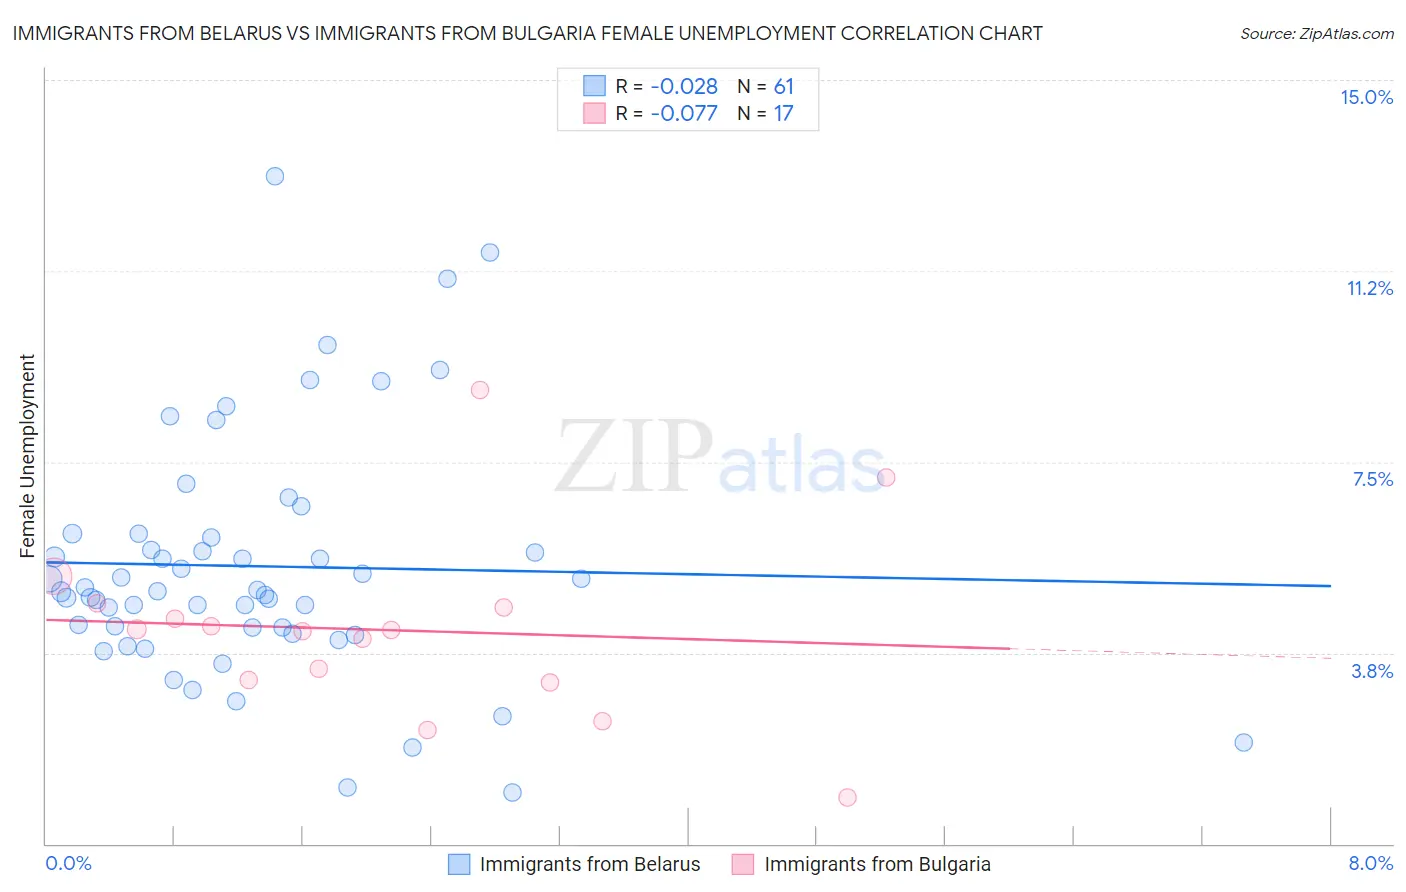 Immigrants from Belarus vs Immigrants from Bulgaria Female Unemployment